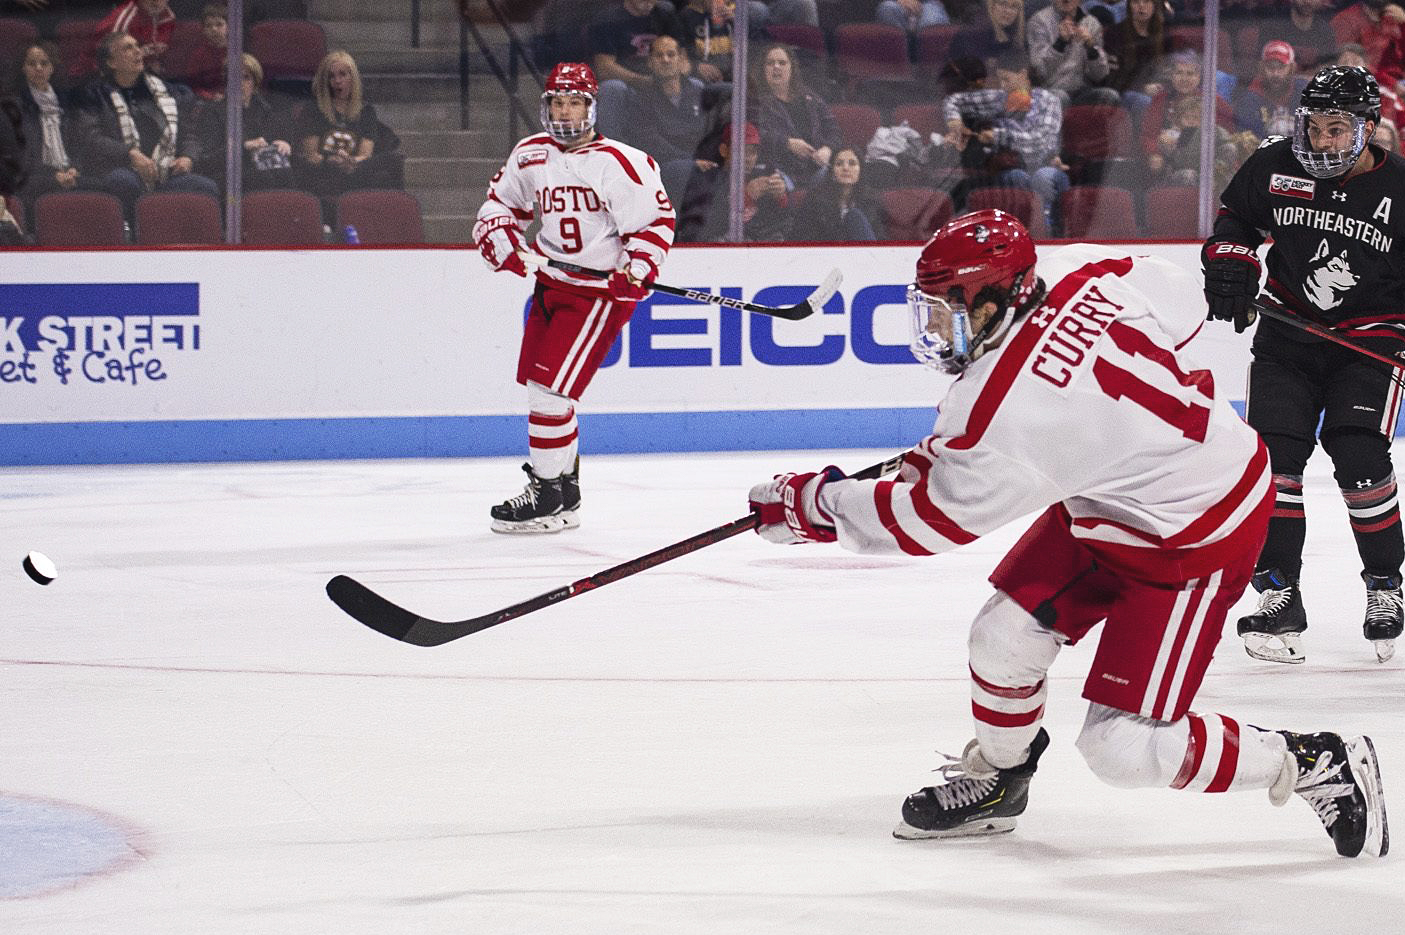 BC and BU are set to take the ice in the first installment of